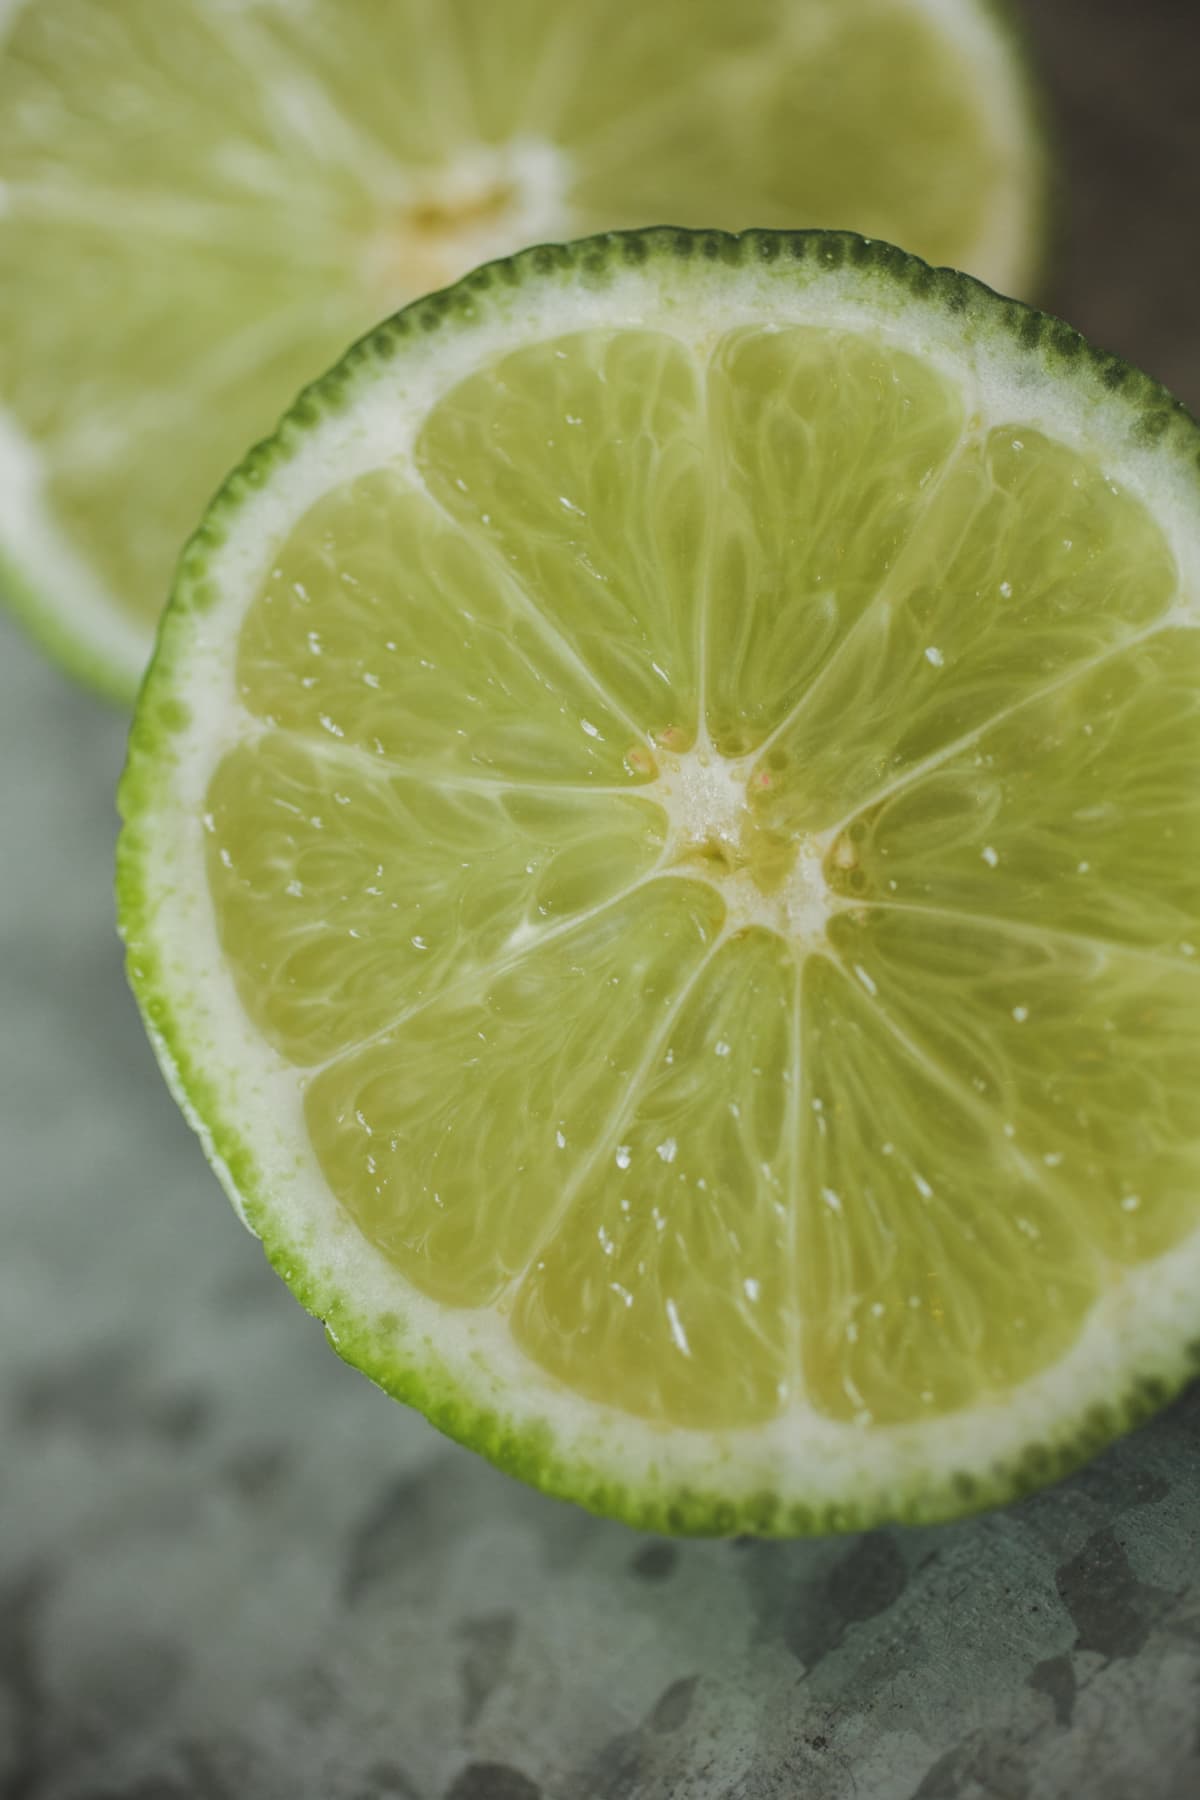 A slice of lime up close